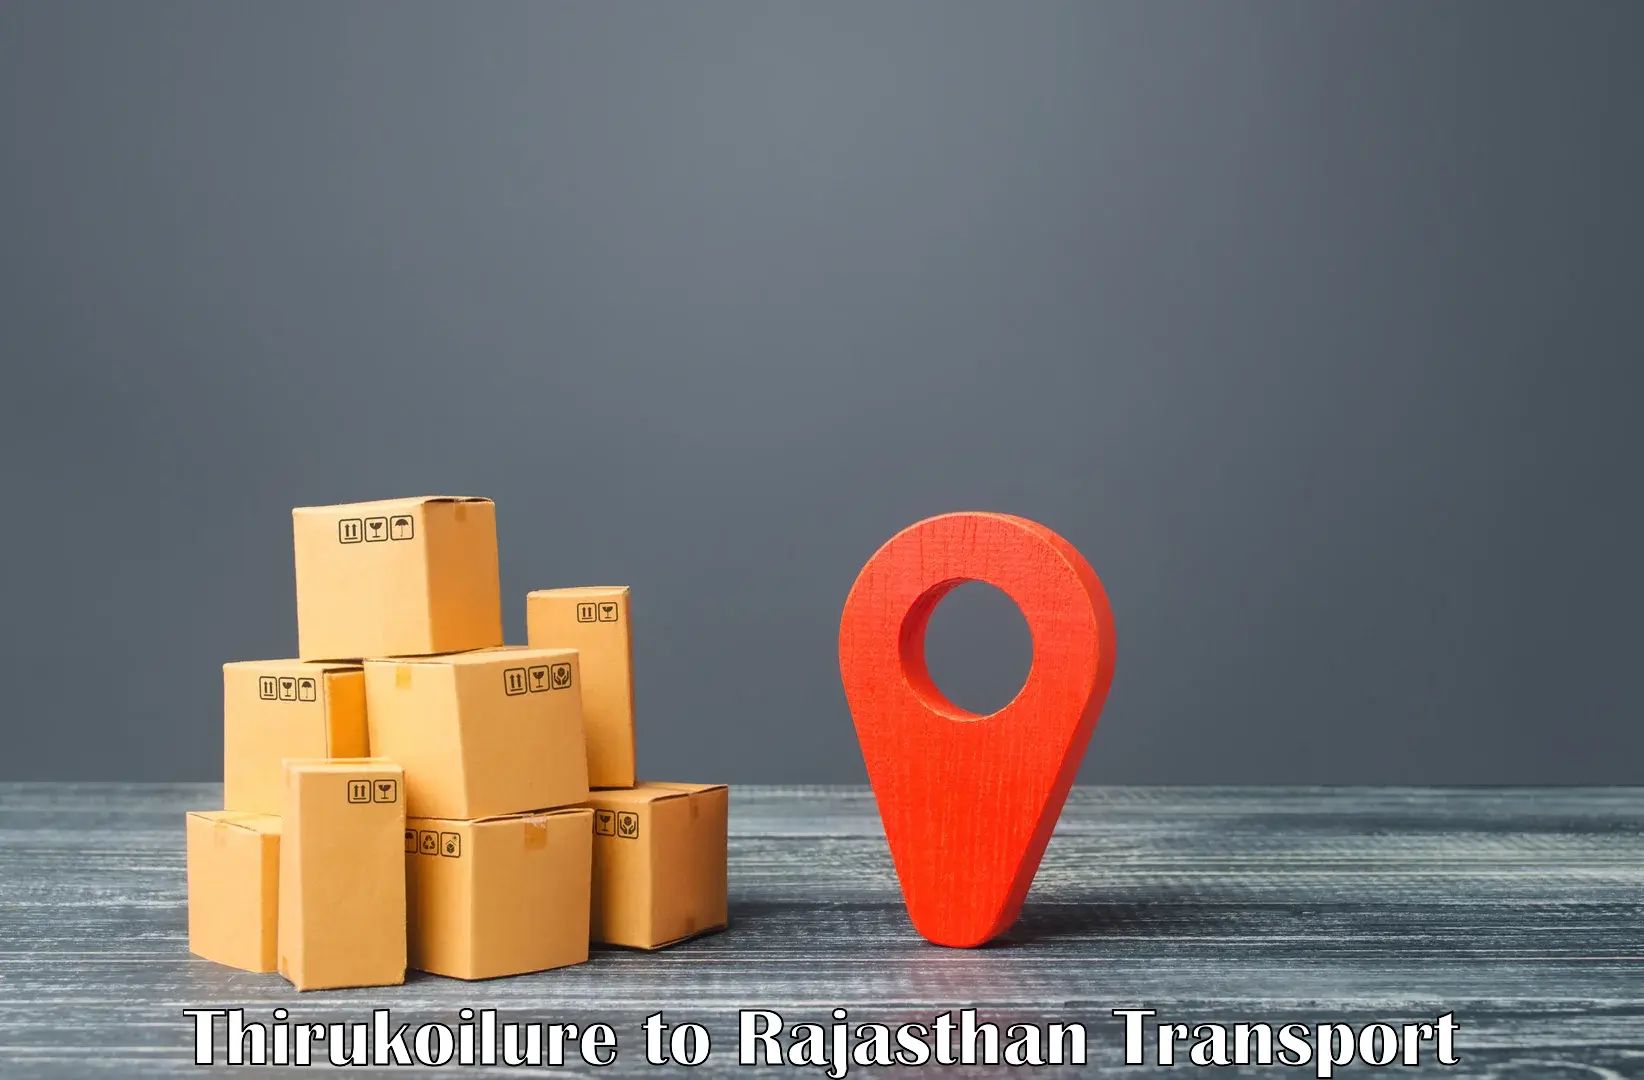 Two wheeler parcel service in Thirukoilure to Shrimadhopur